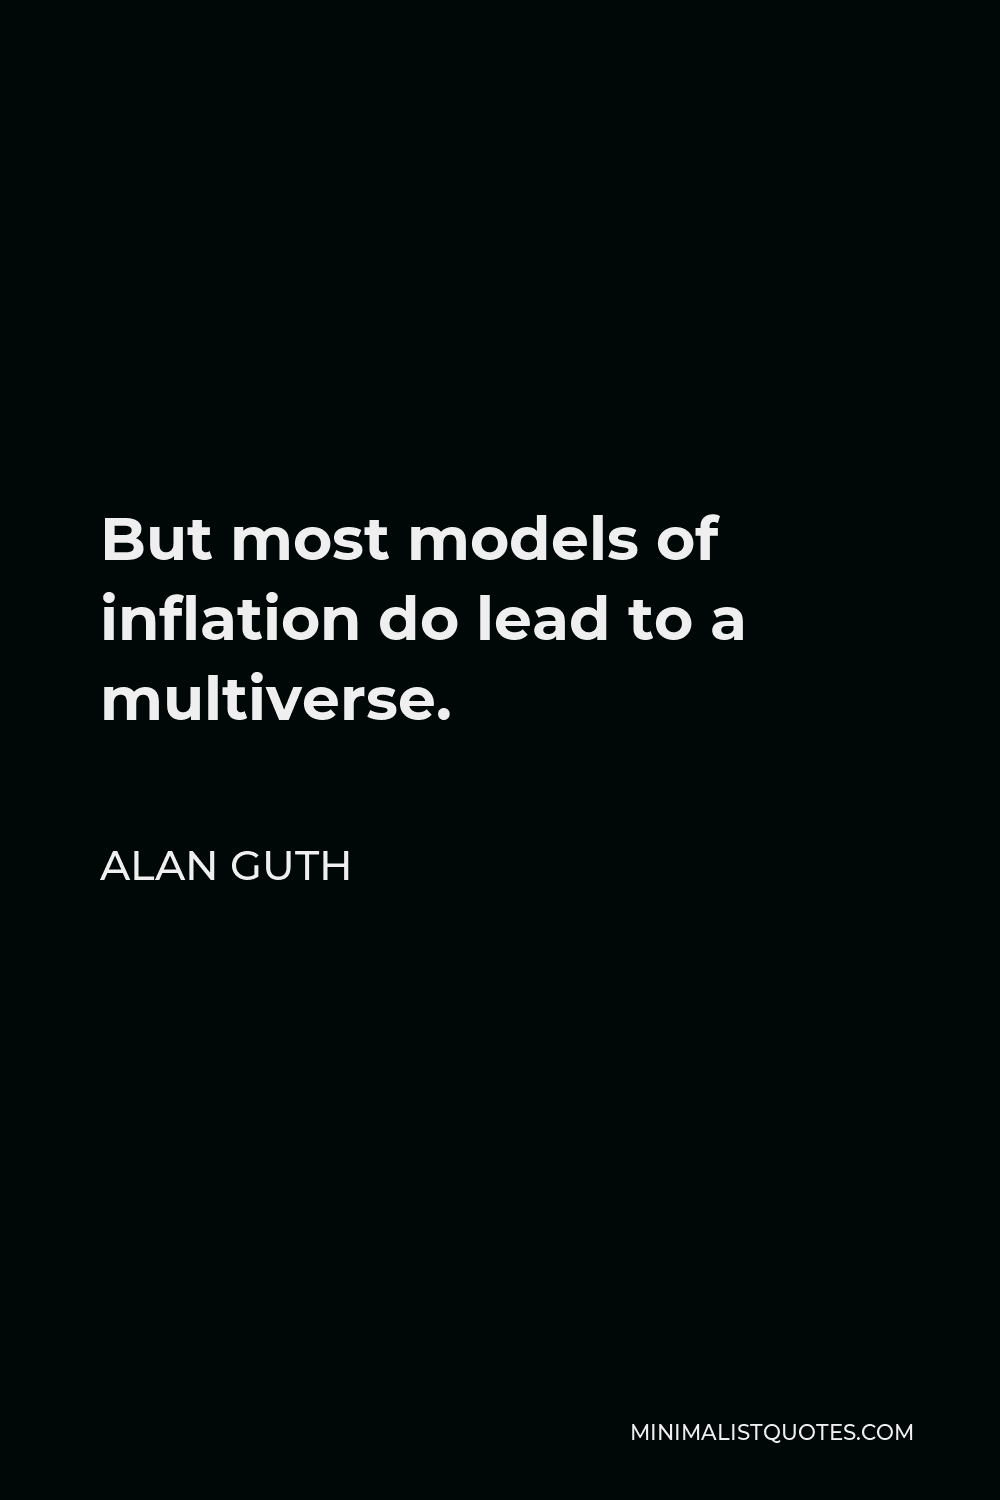 Alan Guth Quote - But most models of inflation do lead to a multiverse.